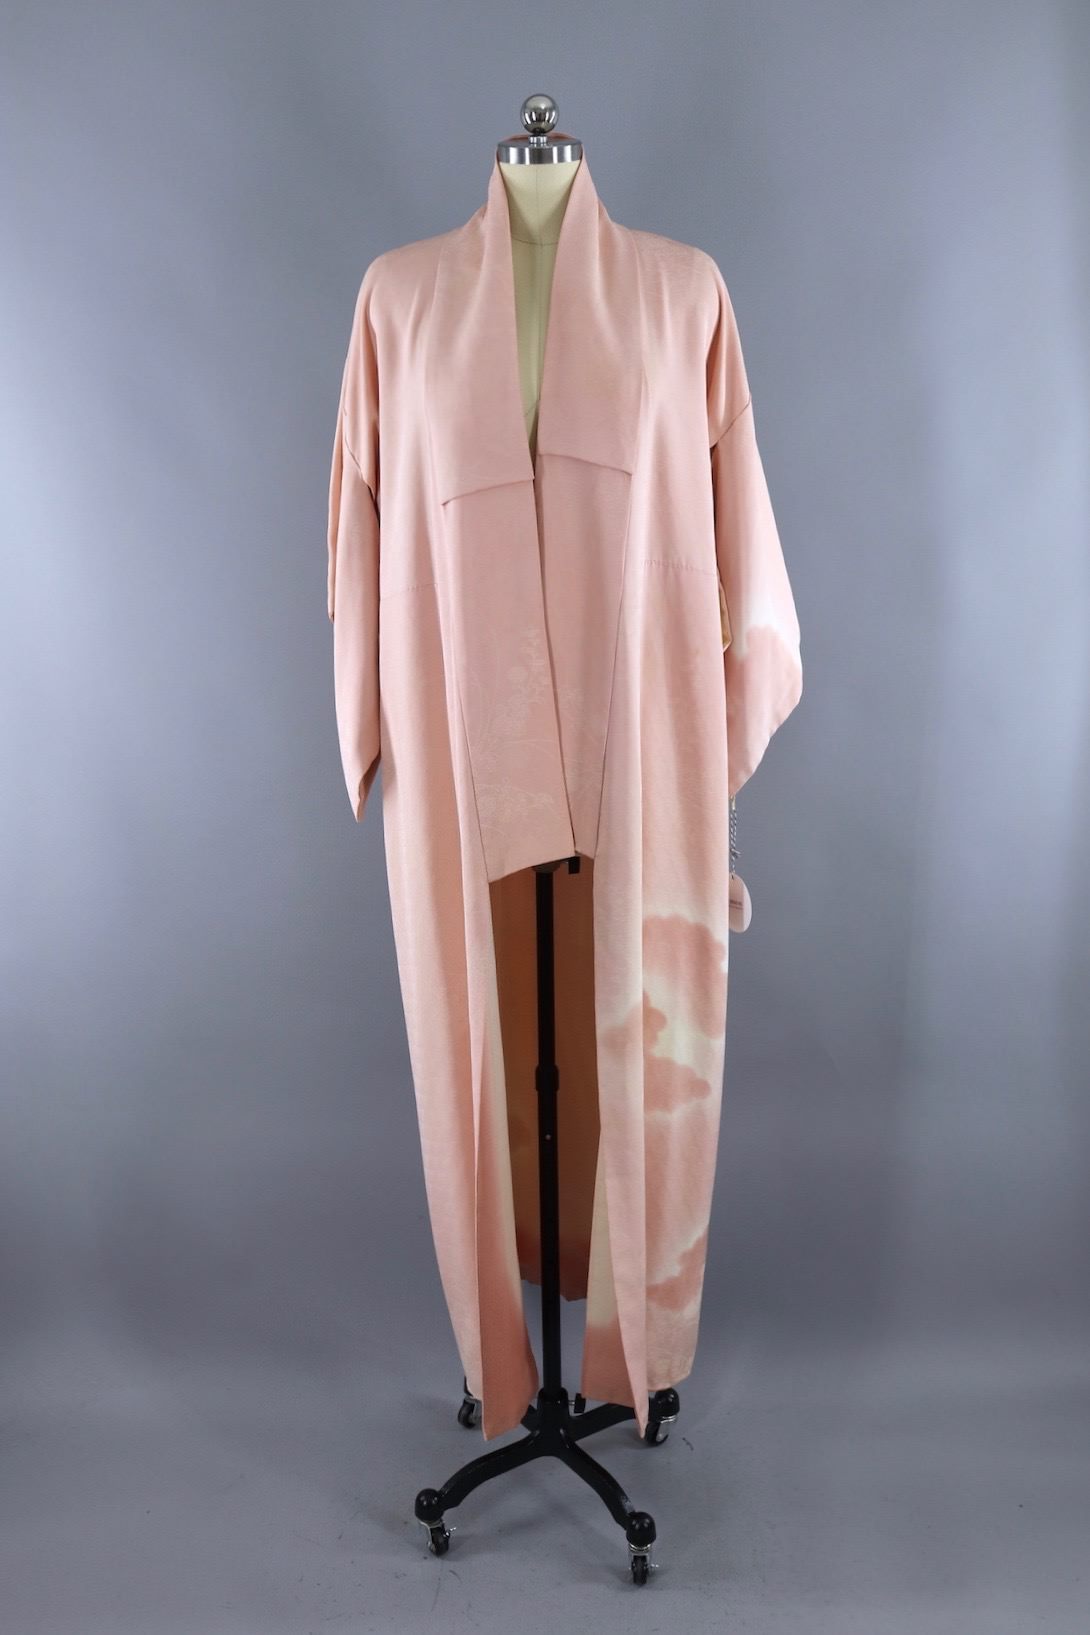 Vintage Silk Kimono Robe / Pink and White Ombre Clouds - ThisBlueBird